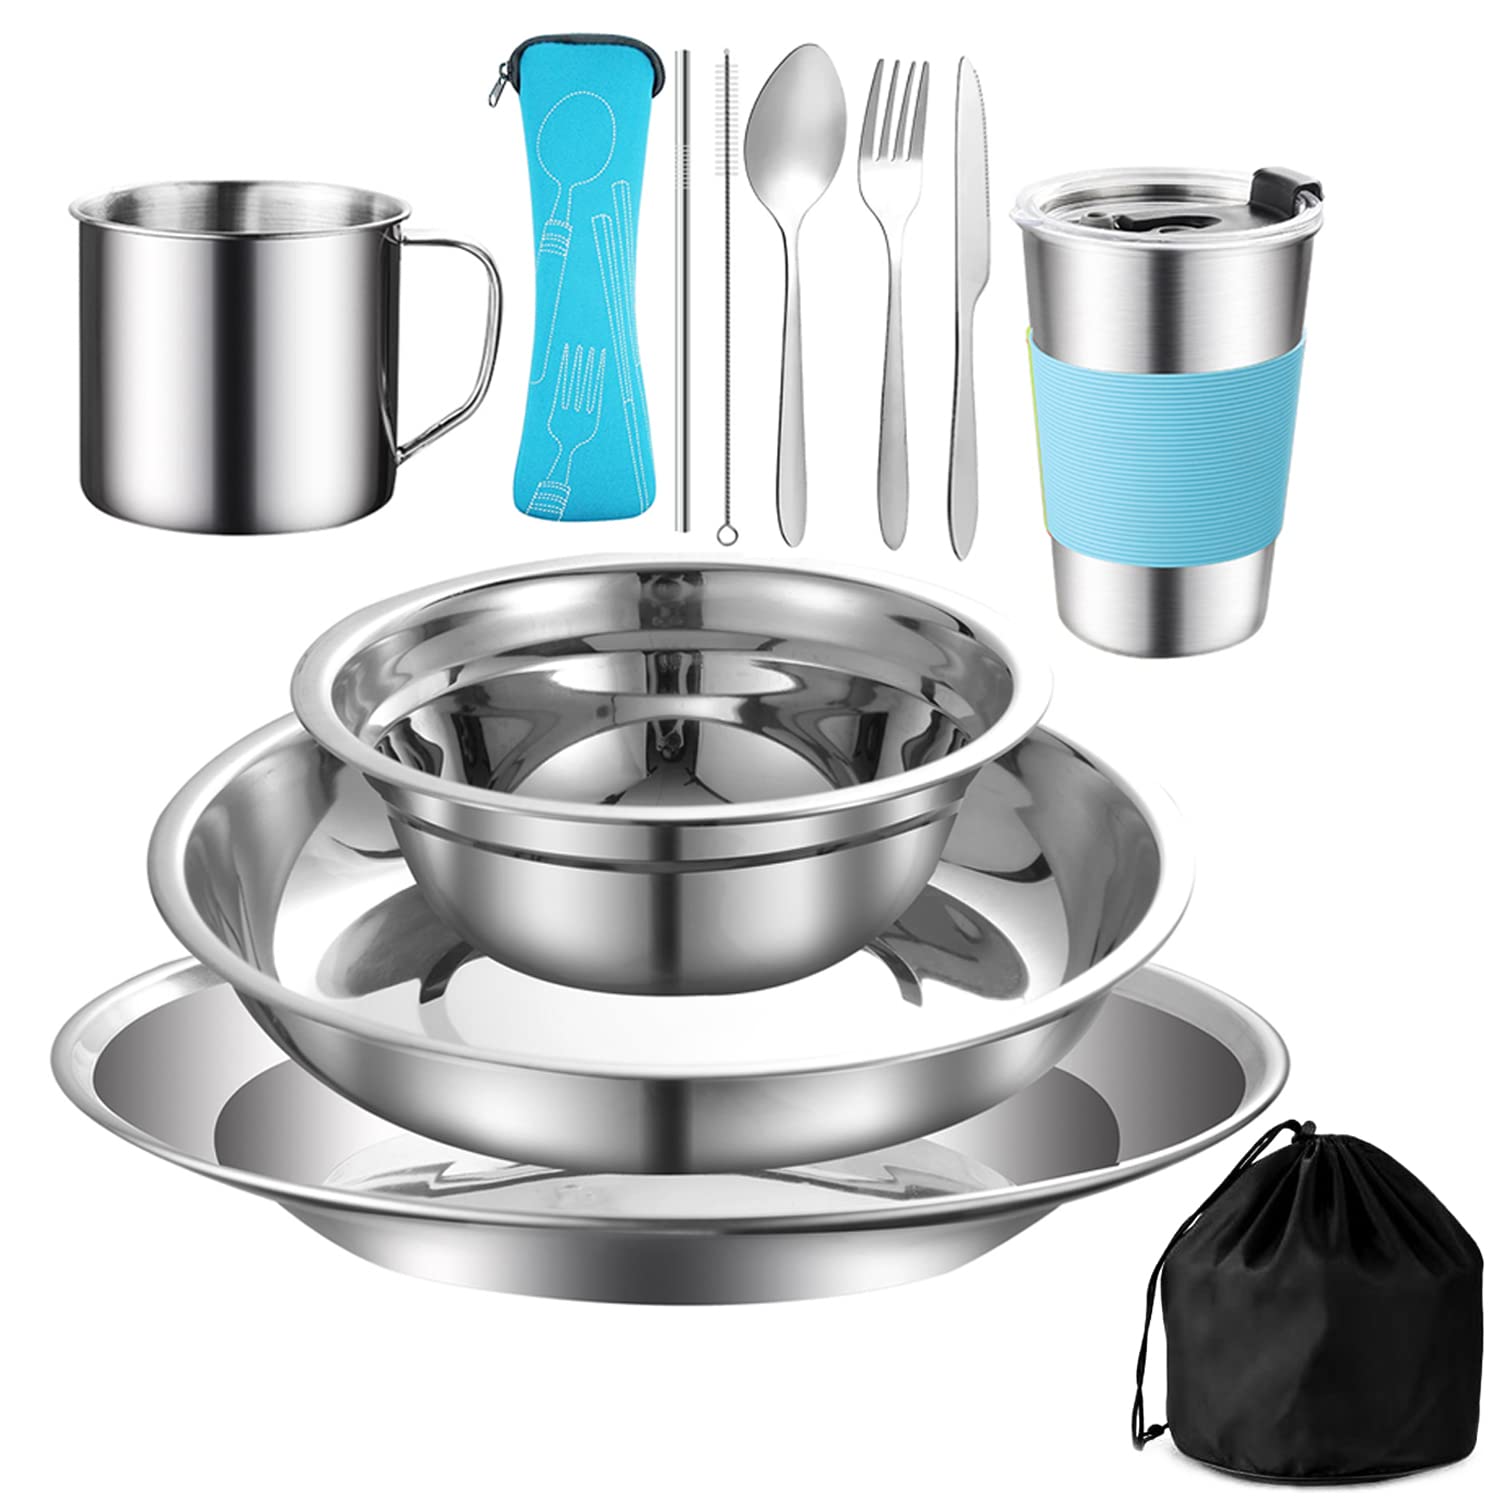 Camping Set With Case, Camping Mess Kit, Travel Silverware Set, Camping  Utensils For Eating, Portable Cutlery Set